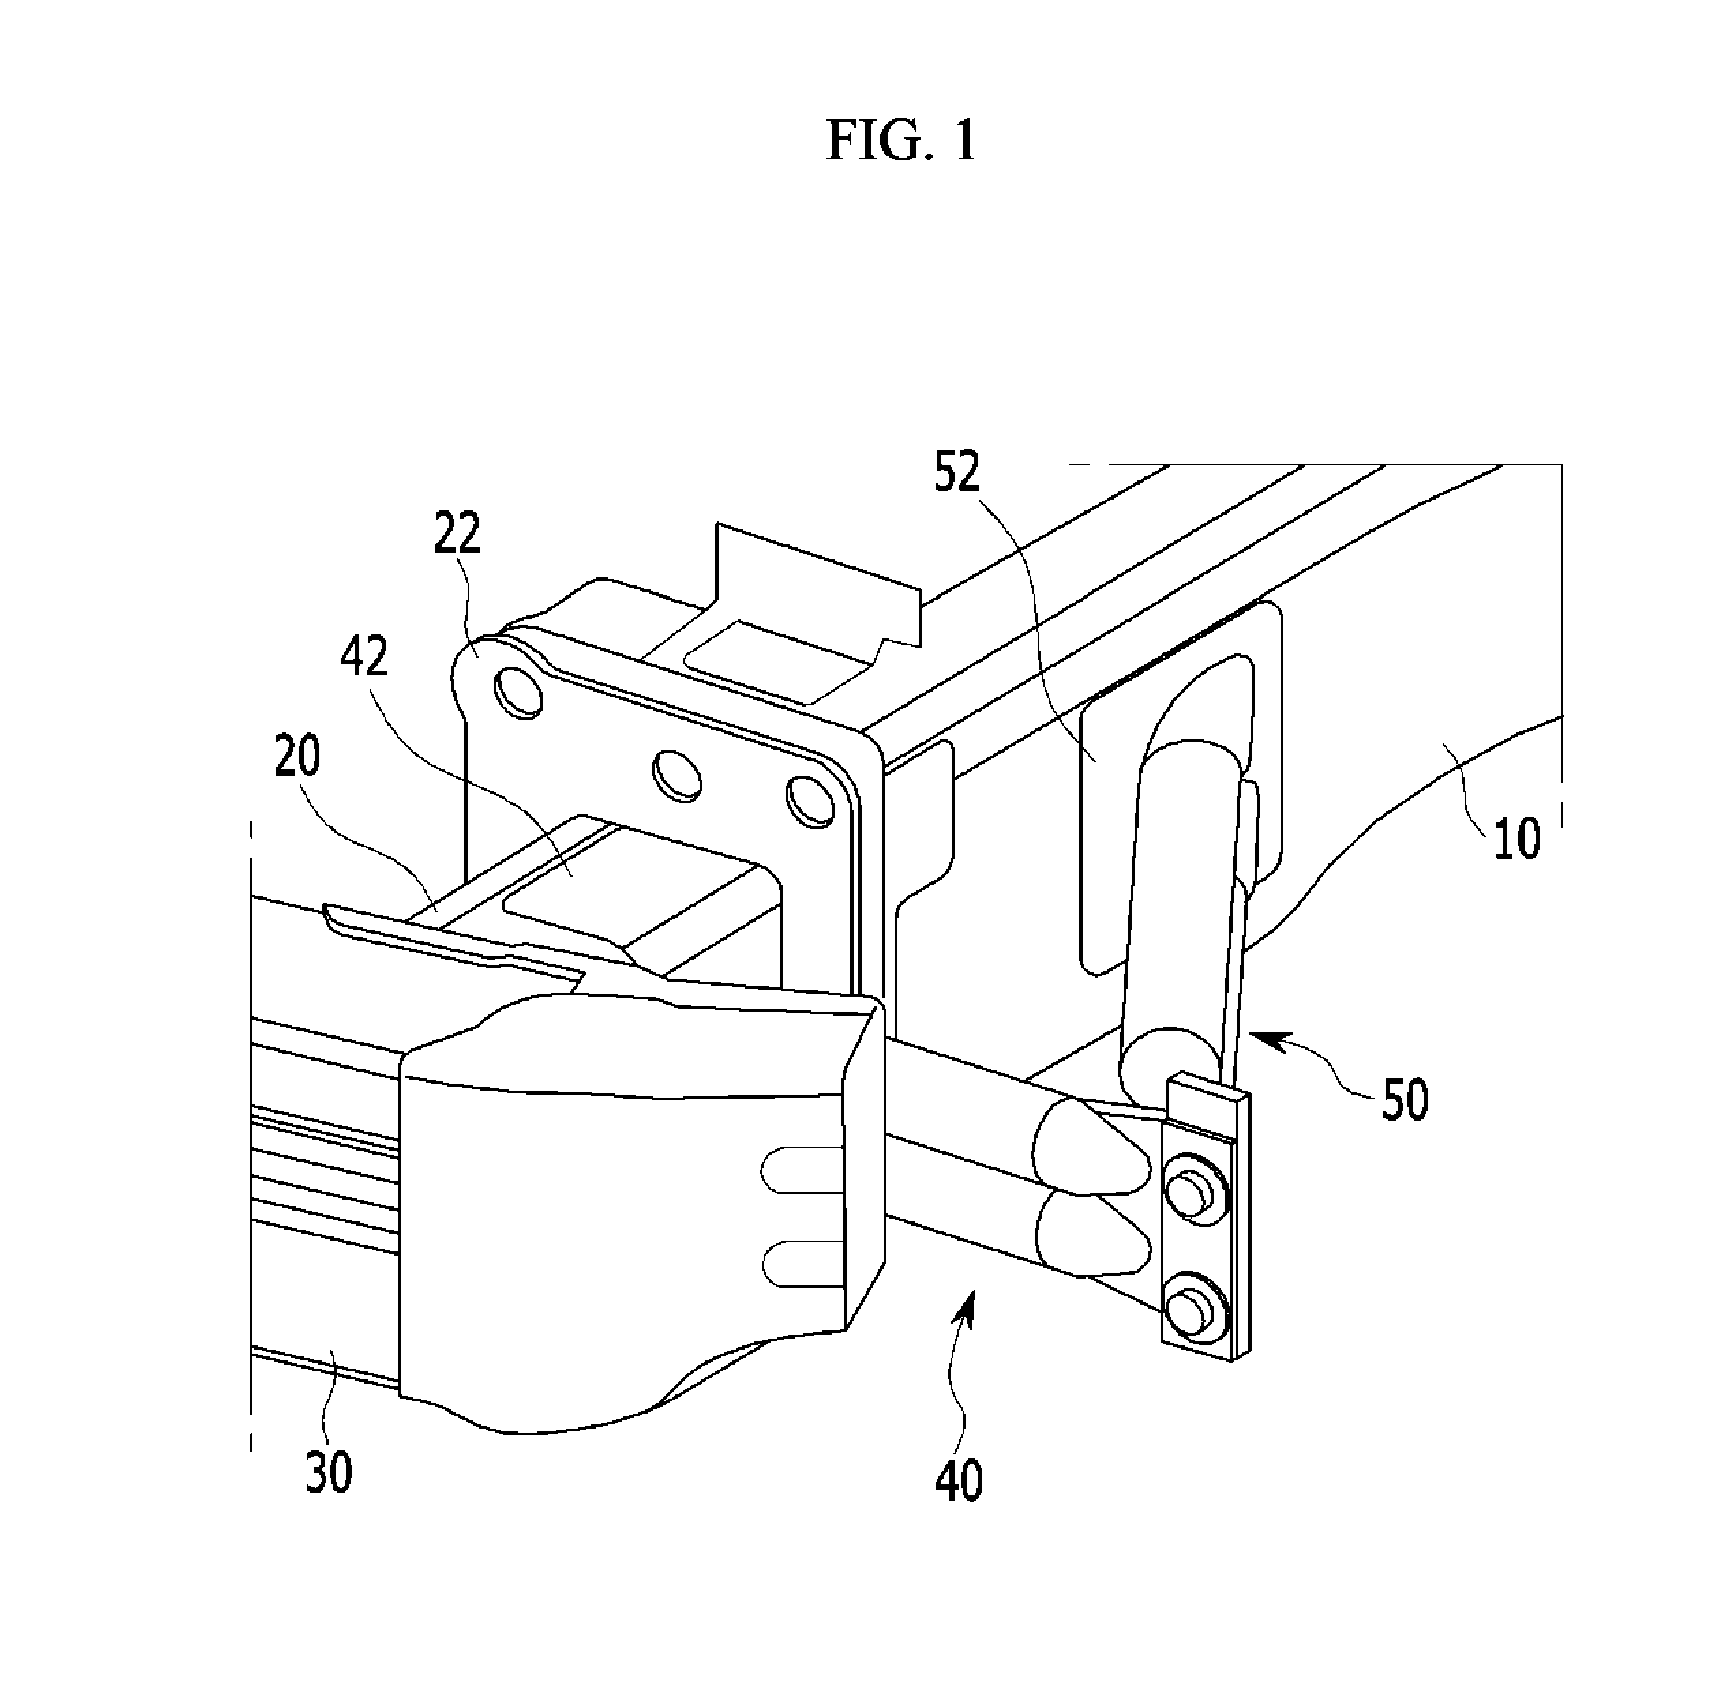 Vehicle body reinforcing structure for coping with small overlap collision